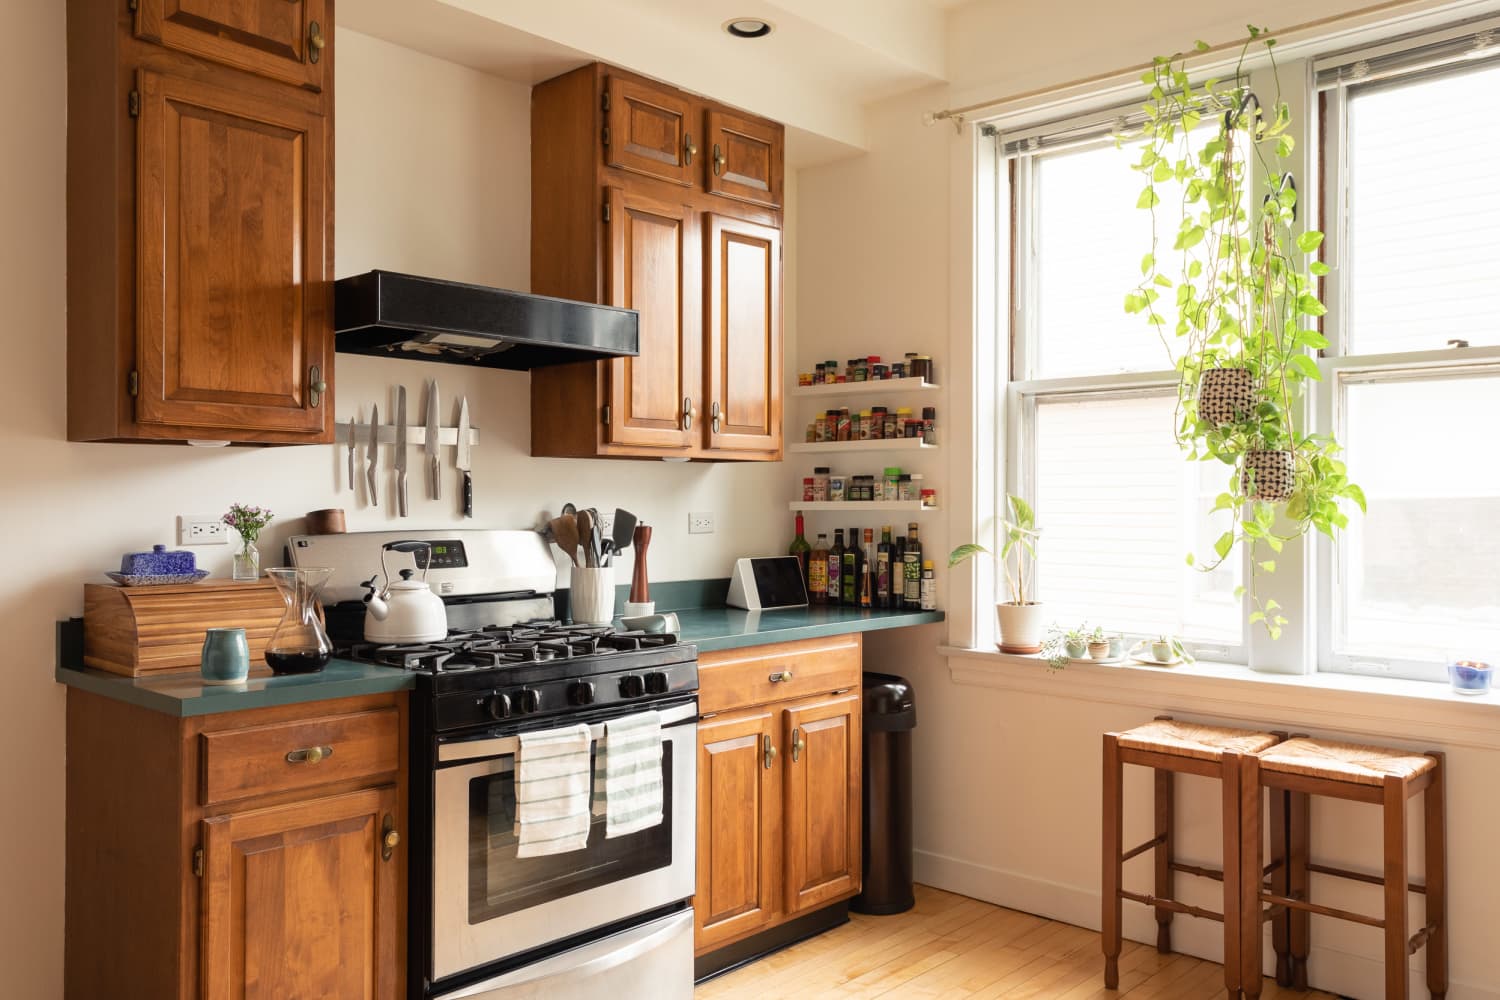 This TikToker Found an Ingenious Way to Completely Change the Look of Their Kitchen Cabinets